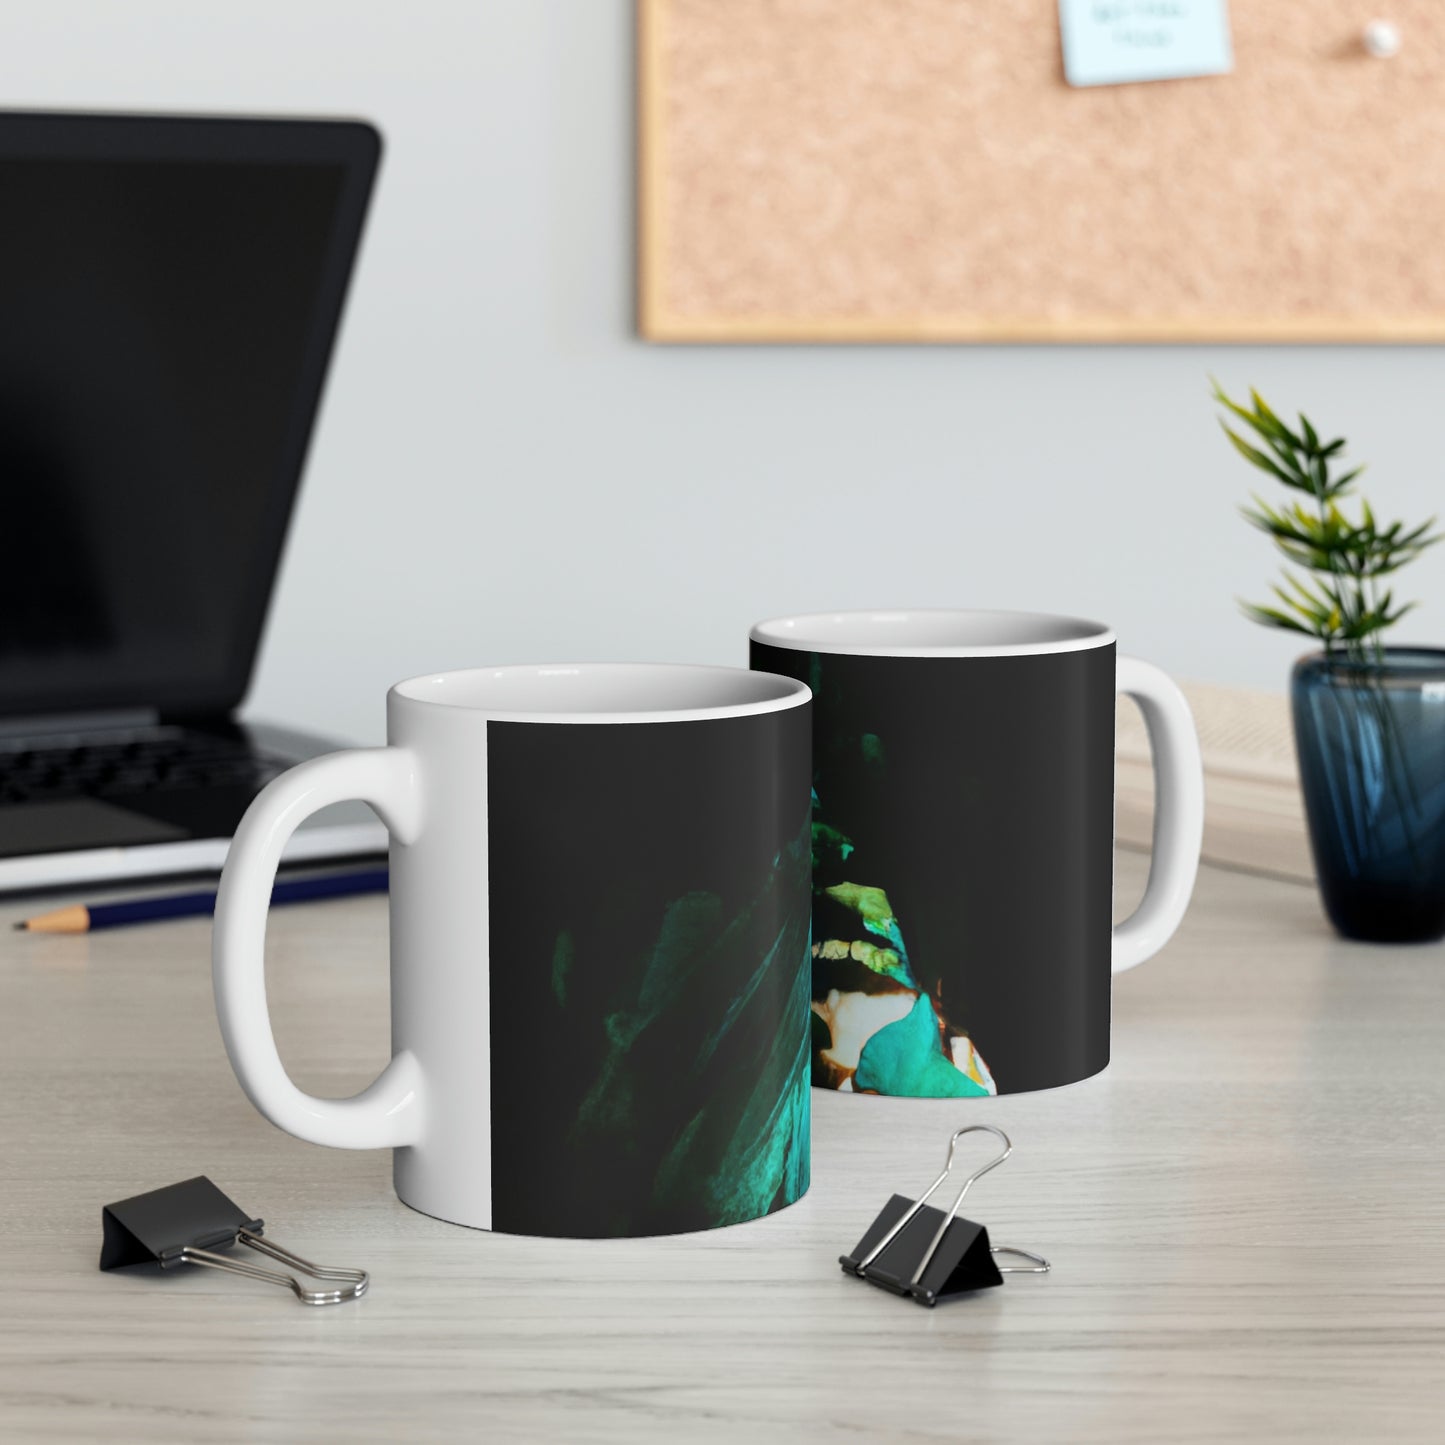 The Gleaming Relic of the Cave - The Alien Ceramic Mug 11 oz